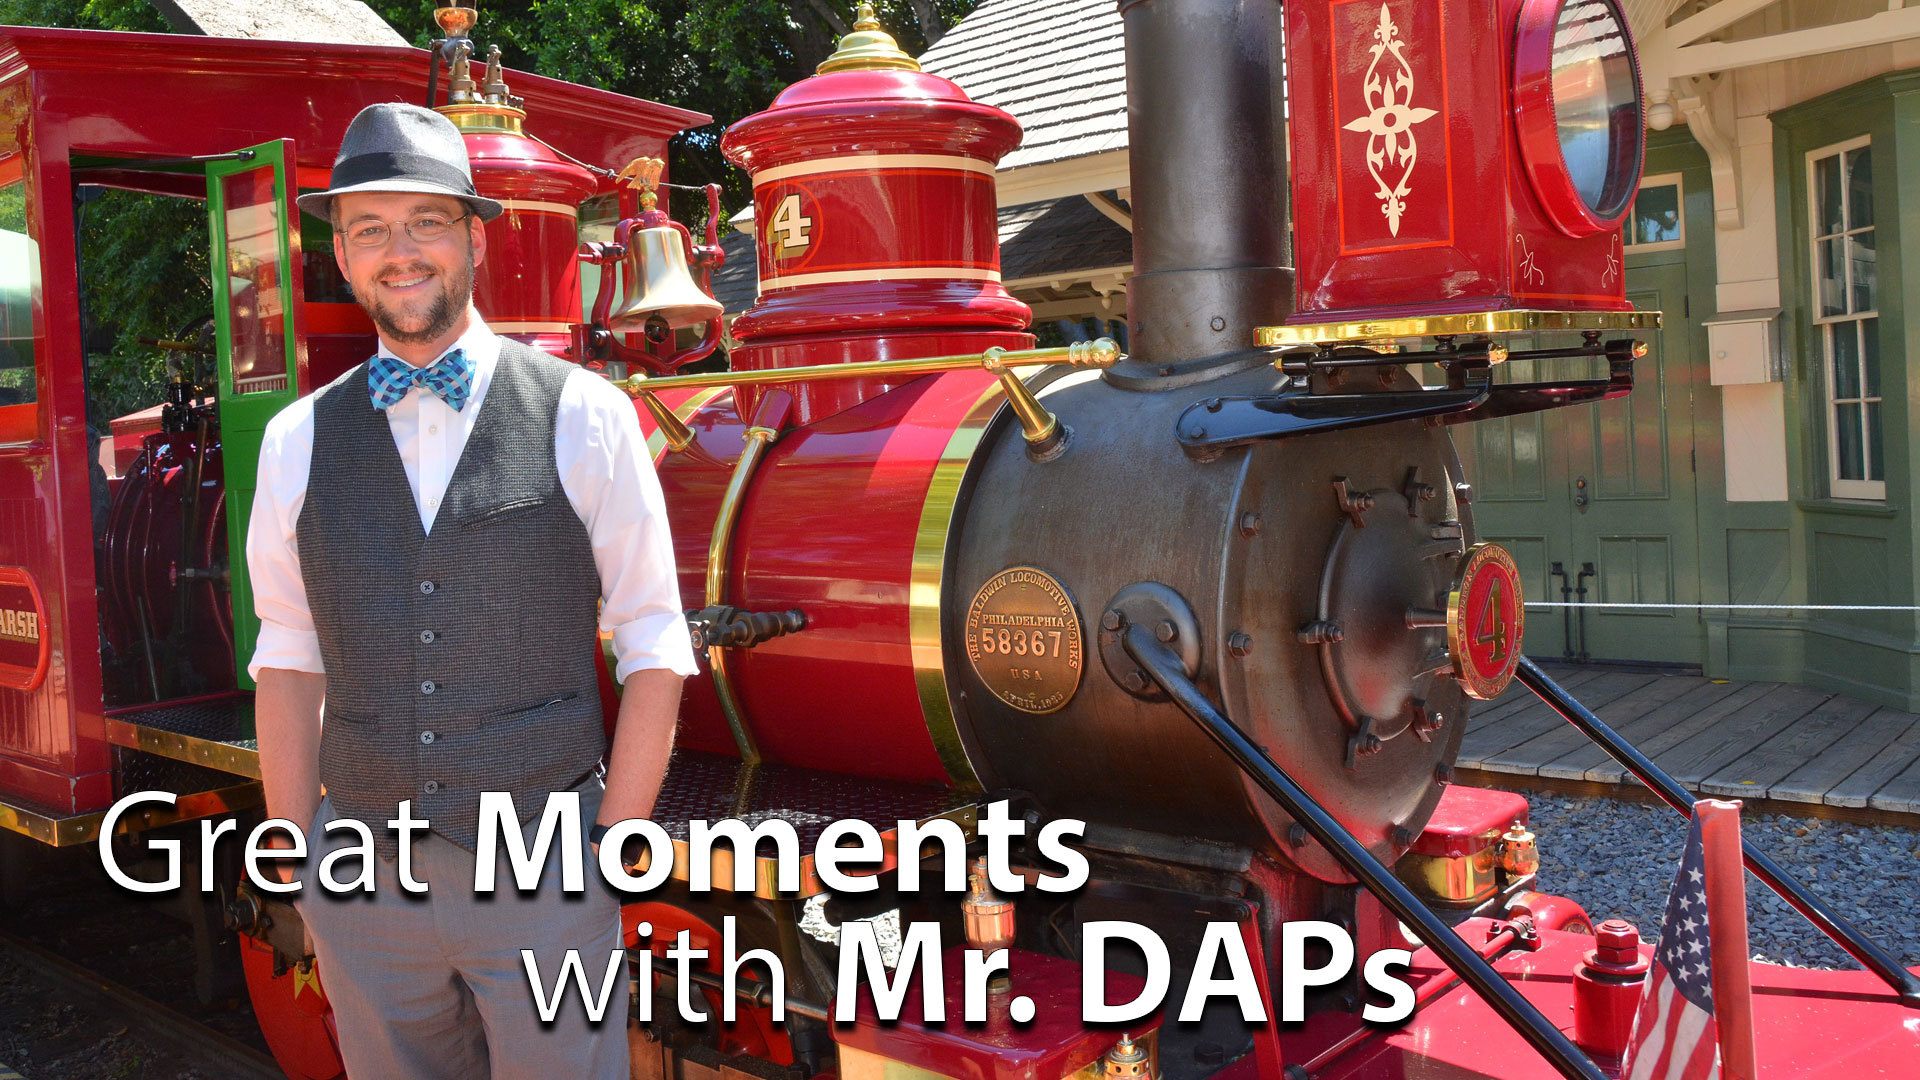 Halloween, Cars, Star Wars, and More - Great Moments with Mr. DAPs